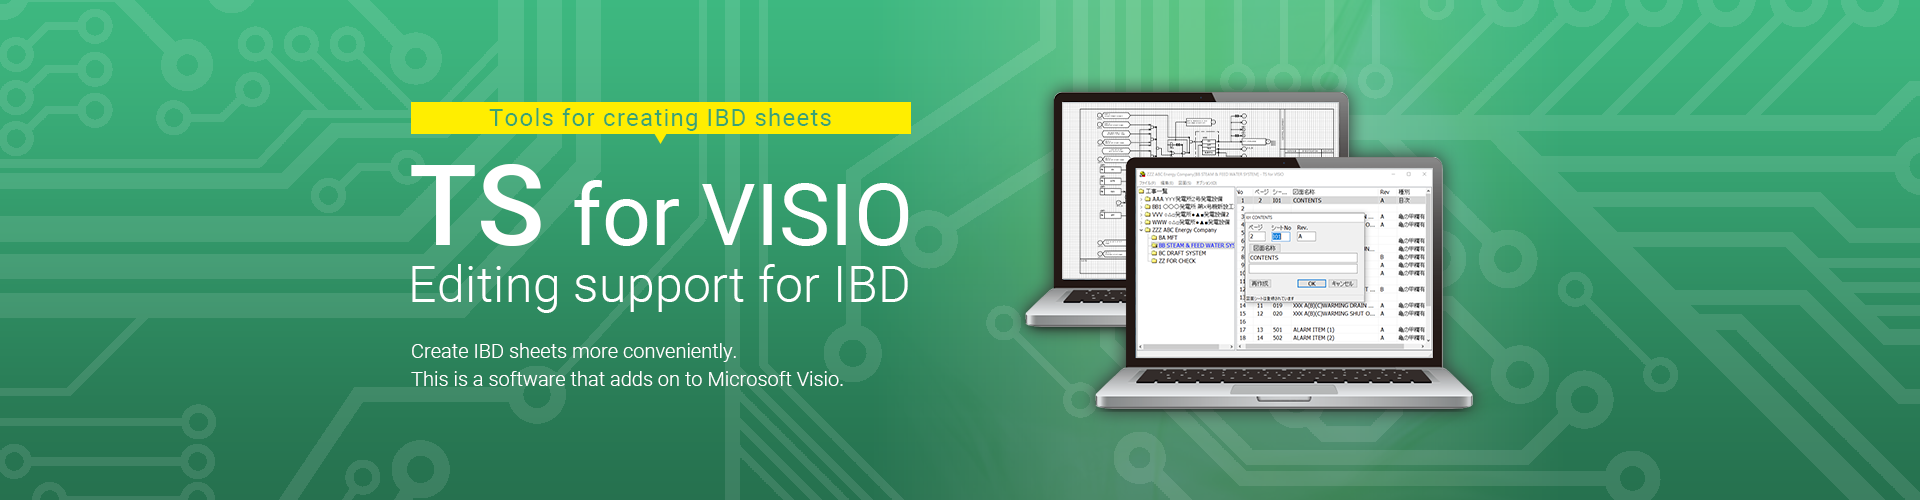 Tools for control circuit design.TS for VISIO.Editing support for IBD.Create IBD sheets more conveniently.This is software that adds on to Microsoft Visio.